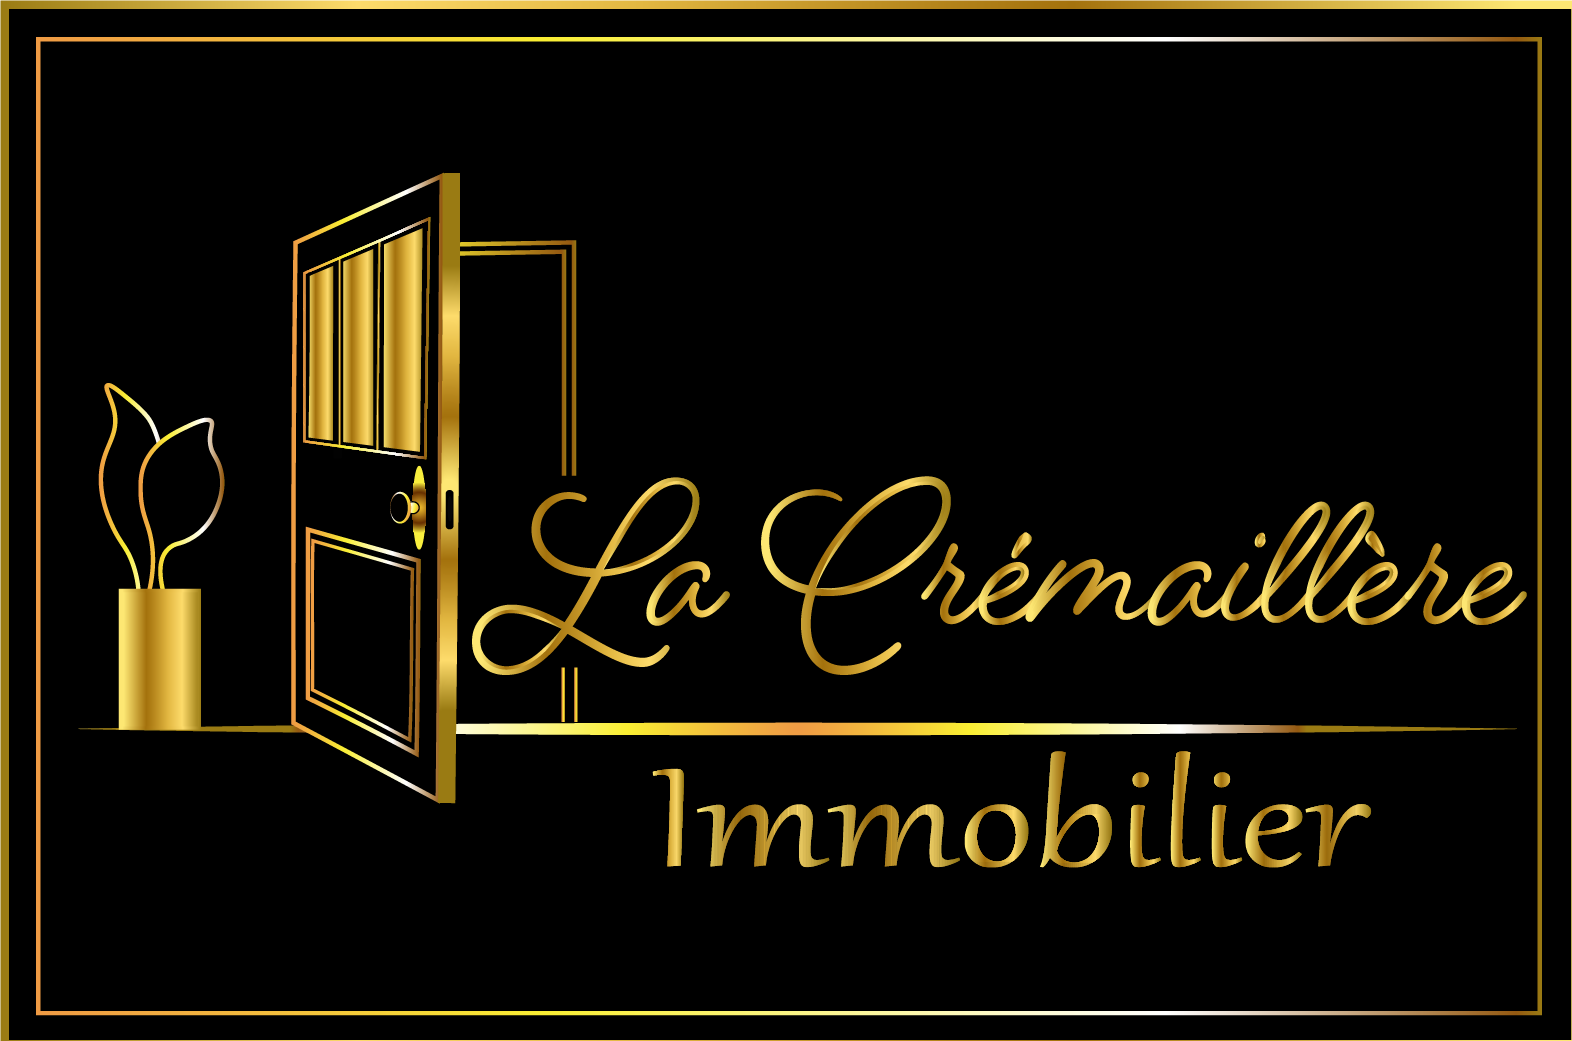 CREMAILLERE_001 